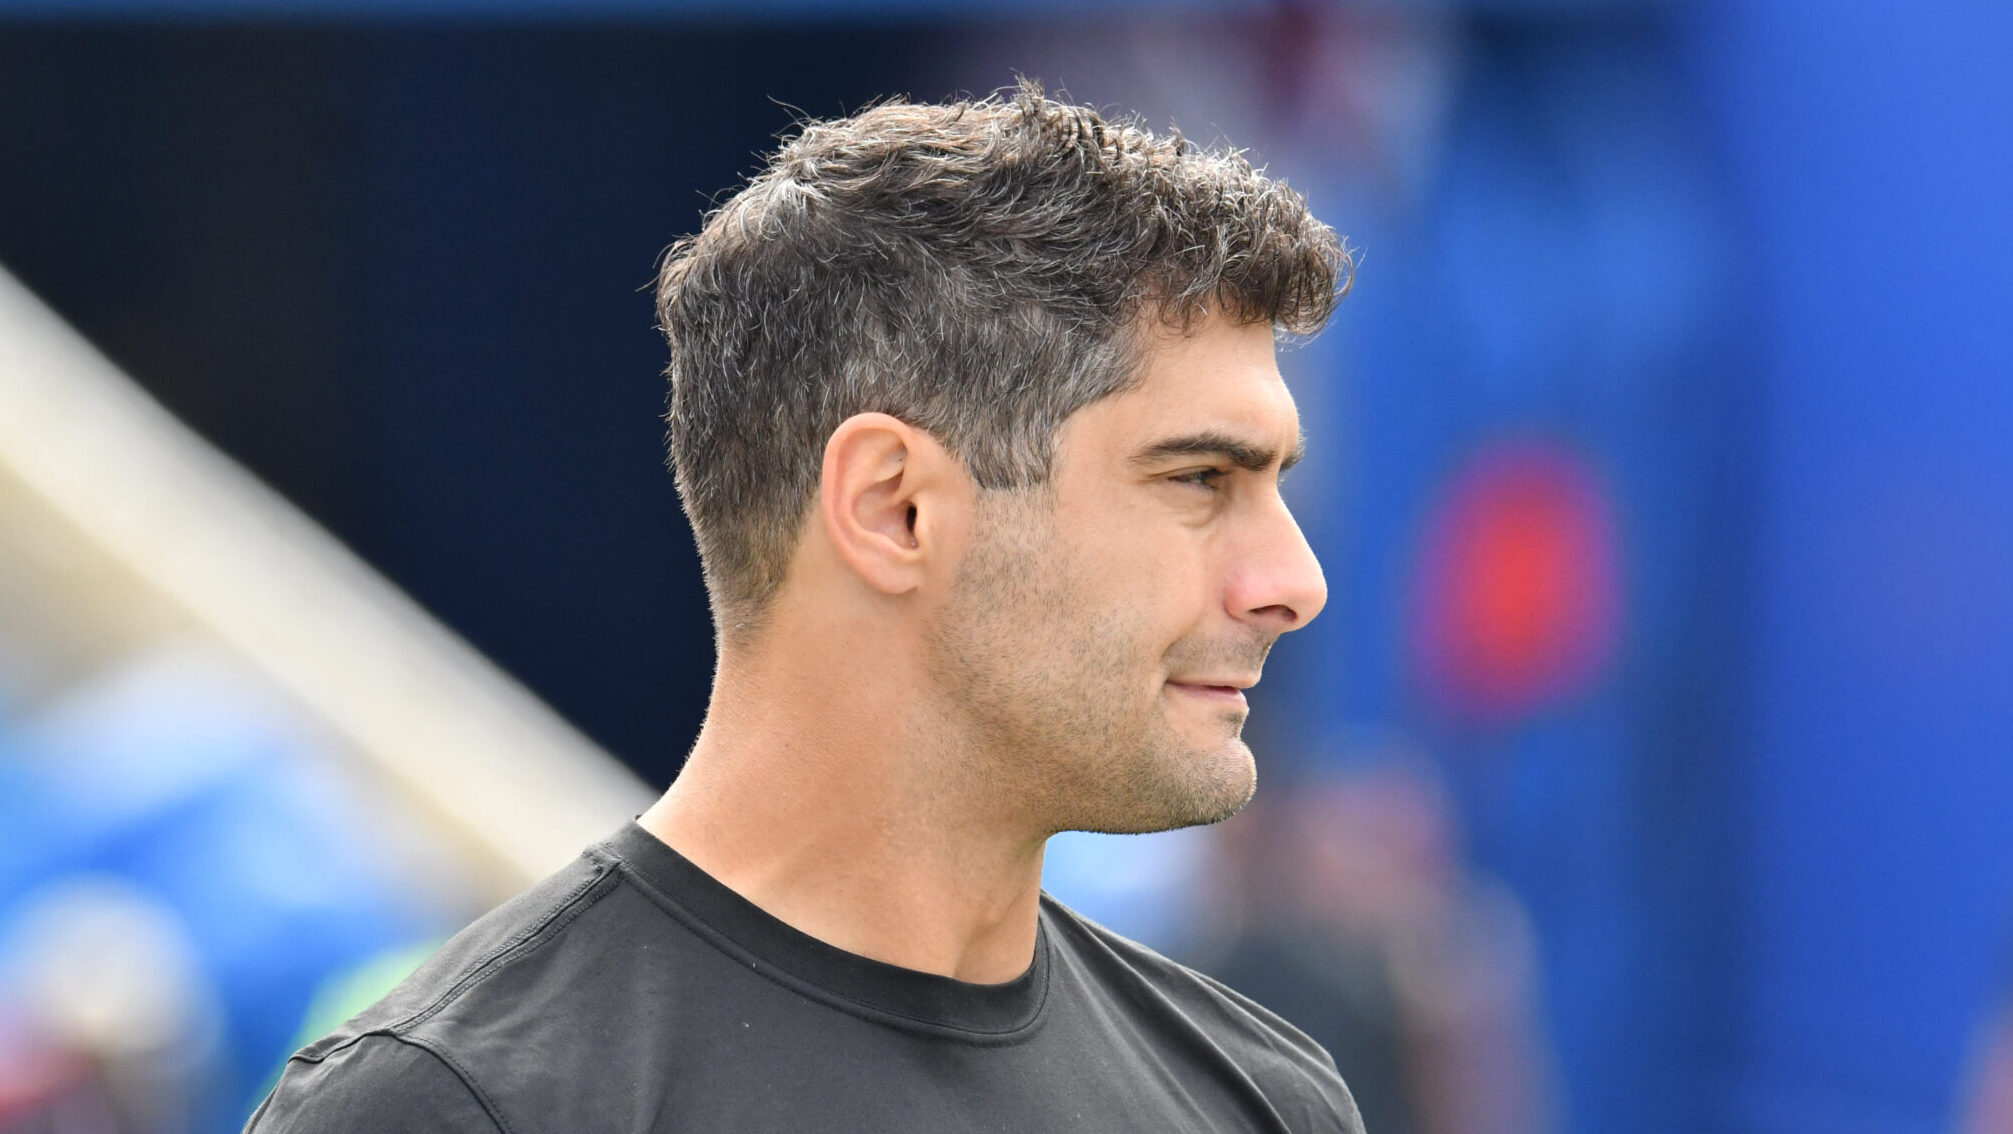 Jimmy Garoppolo looks with his helmet off